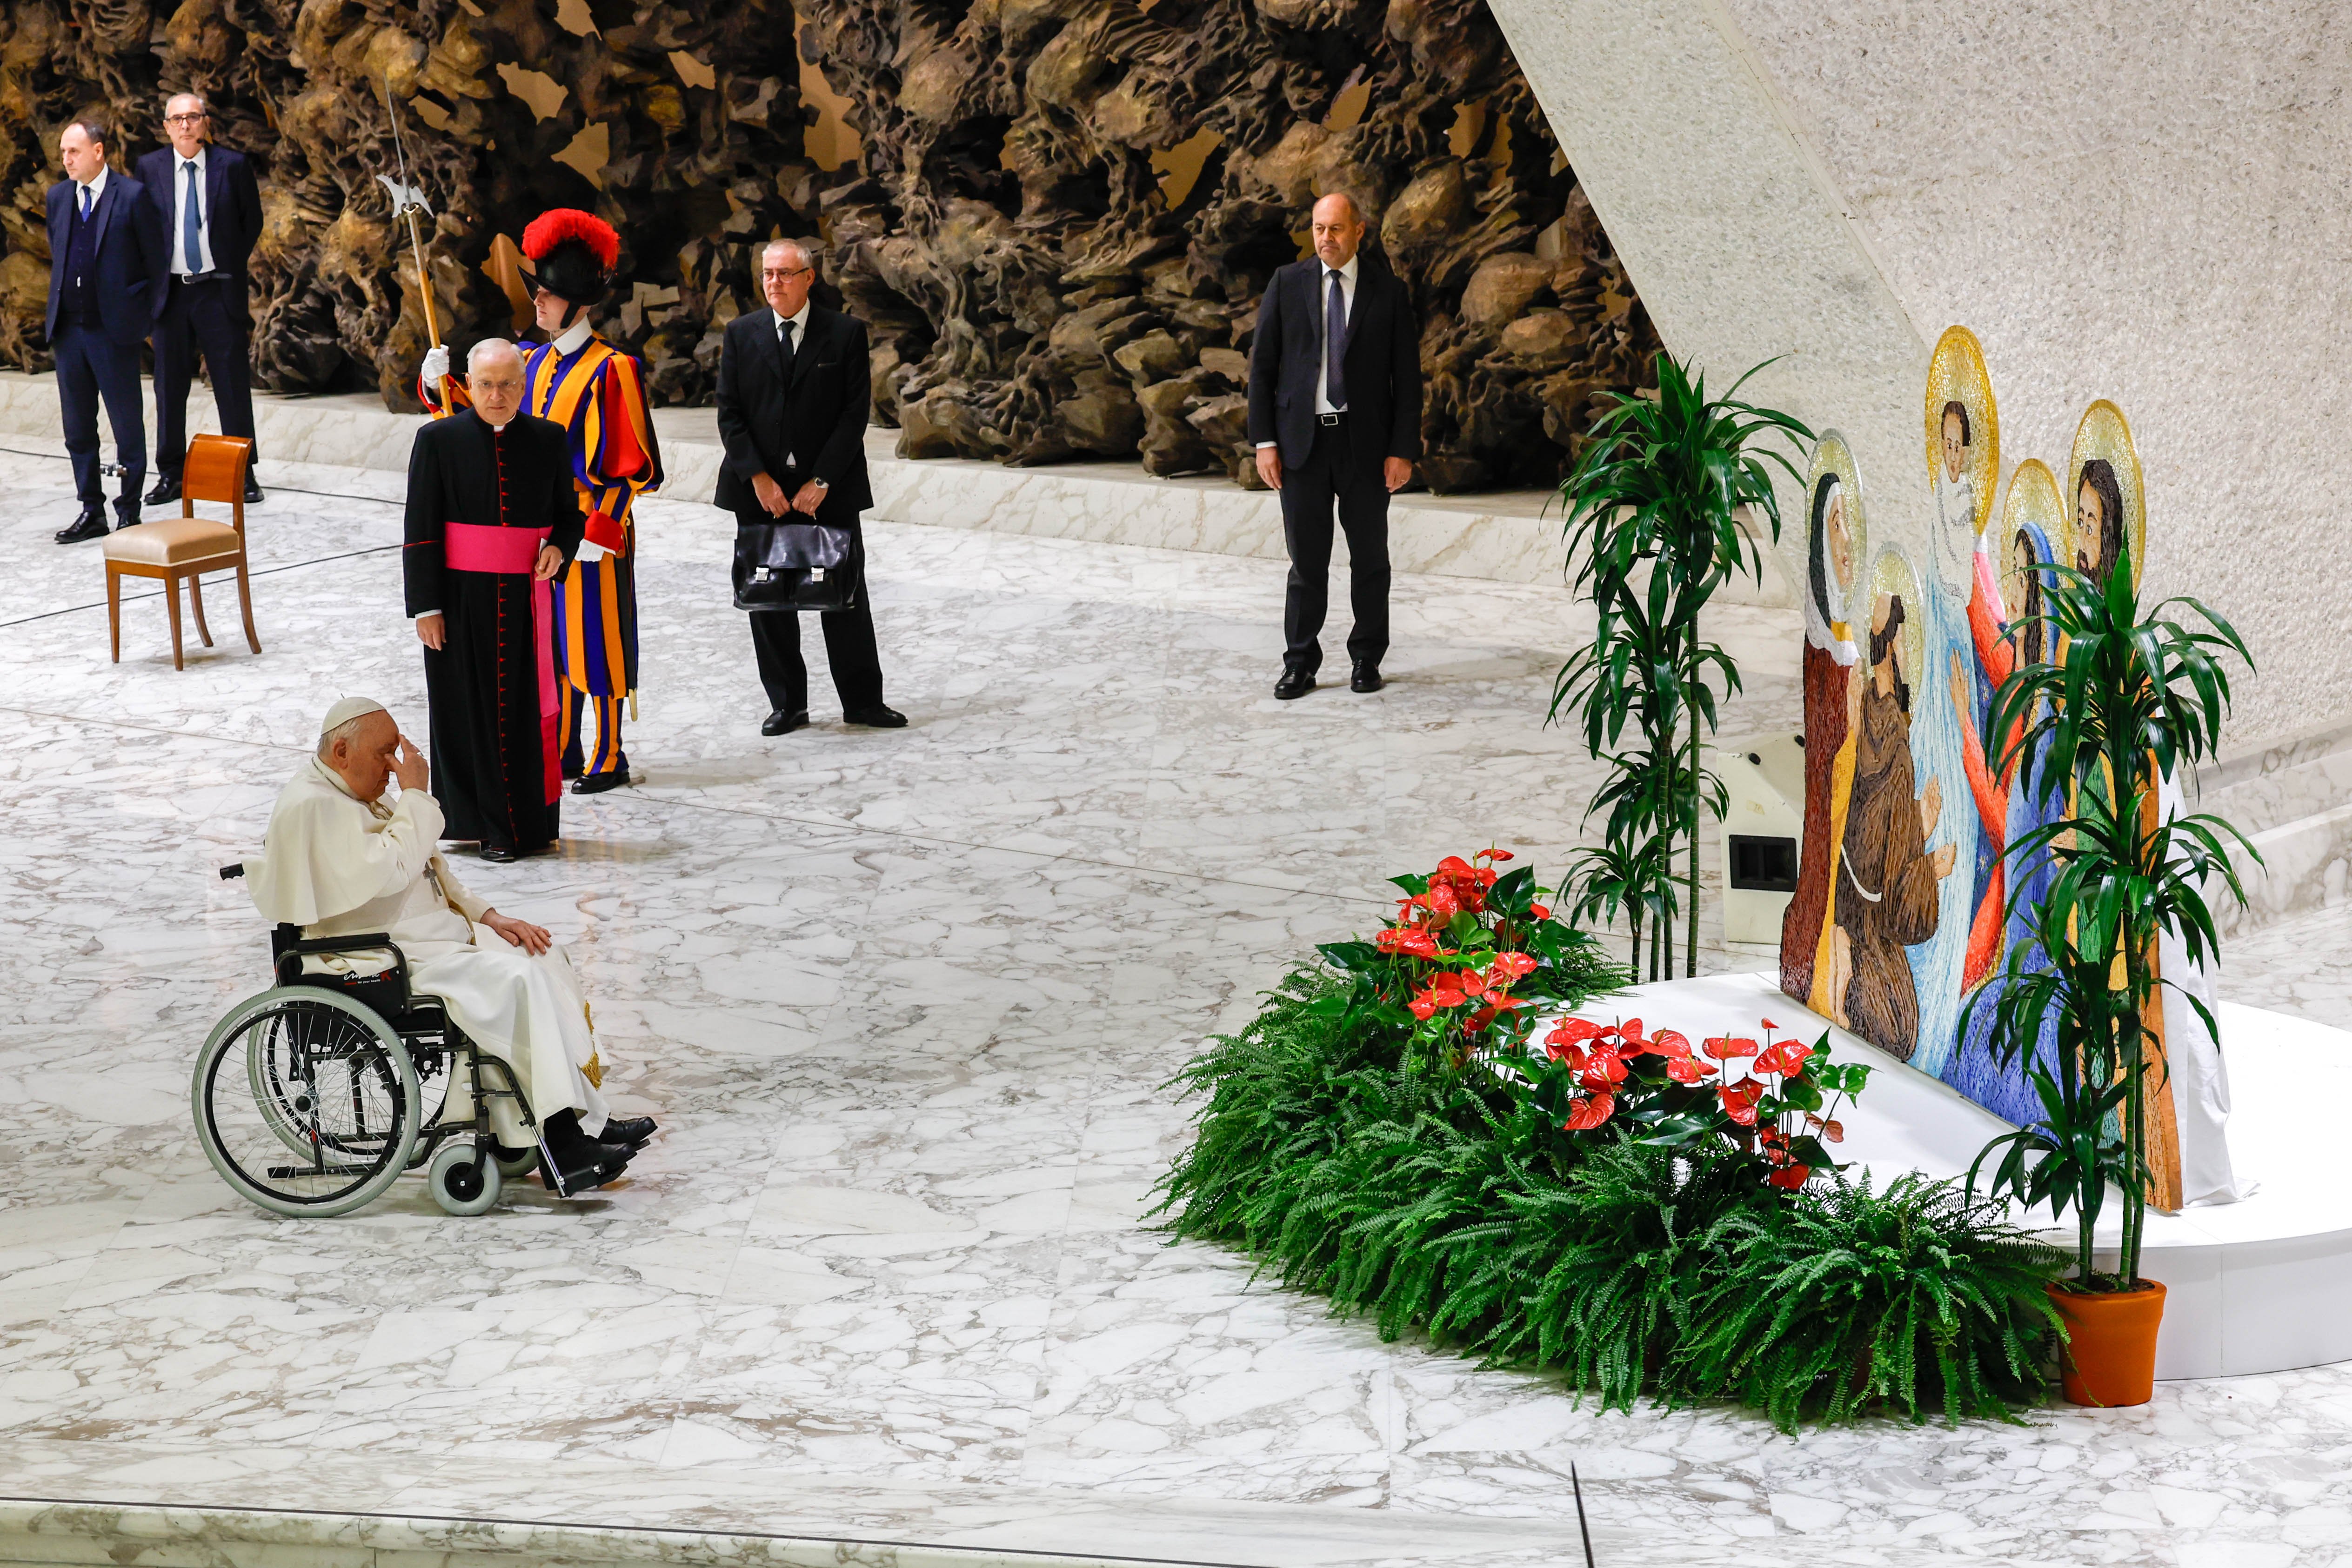 Pope Francis prays in front of a Nativity scene.